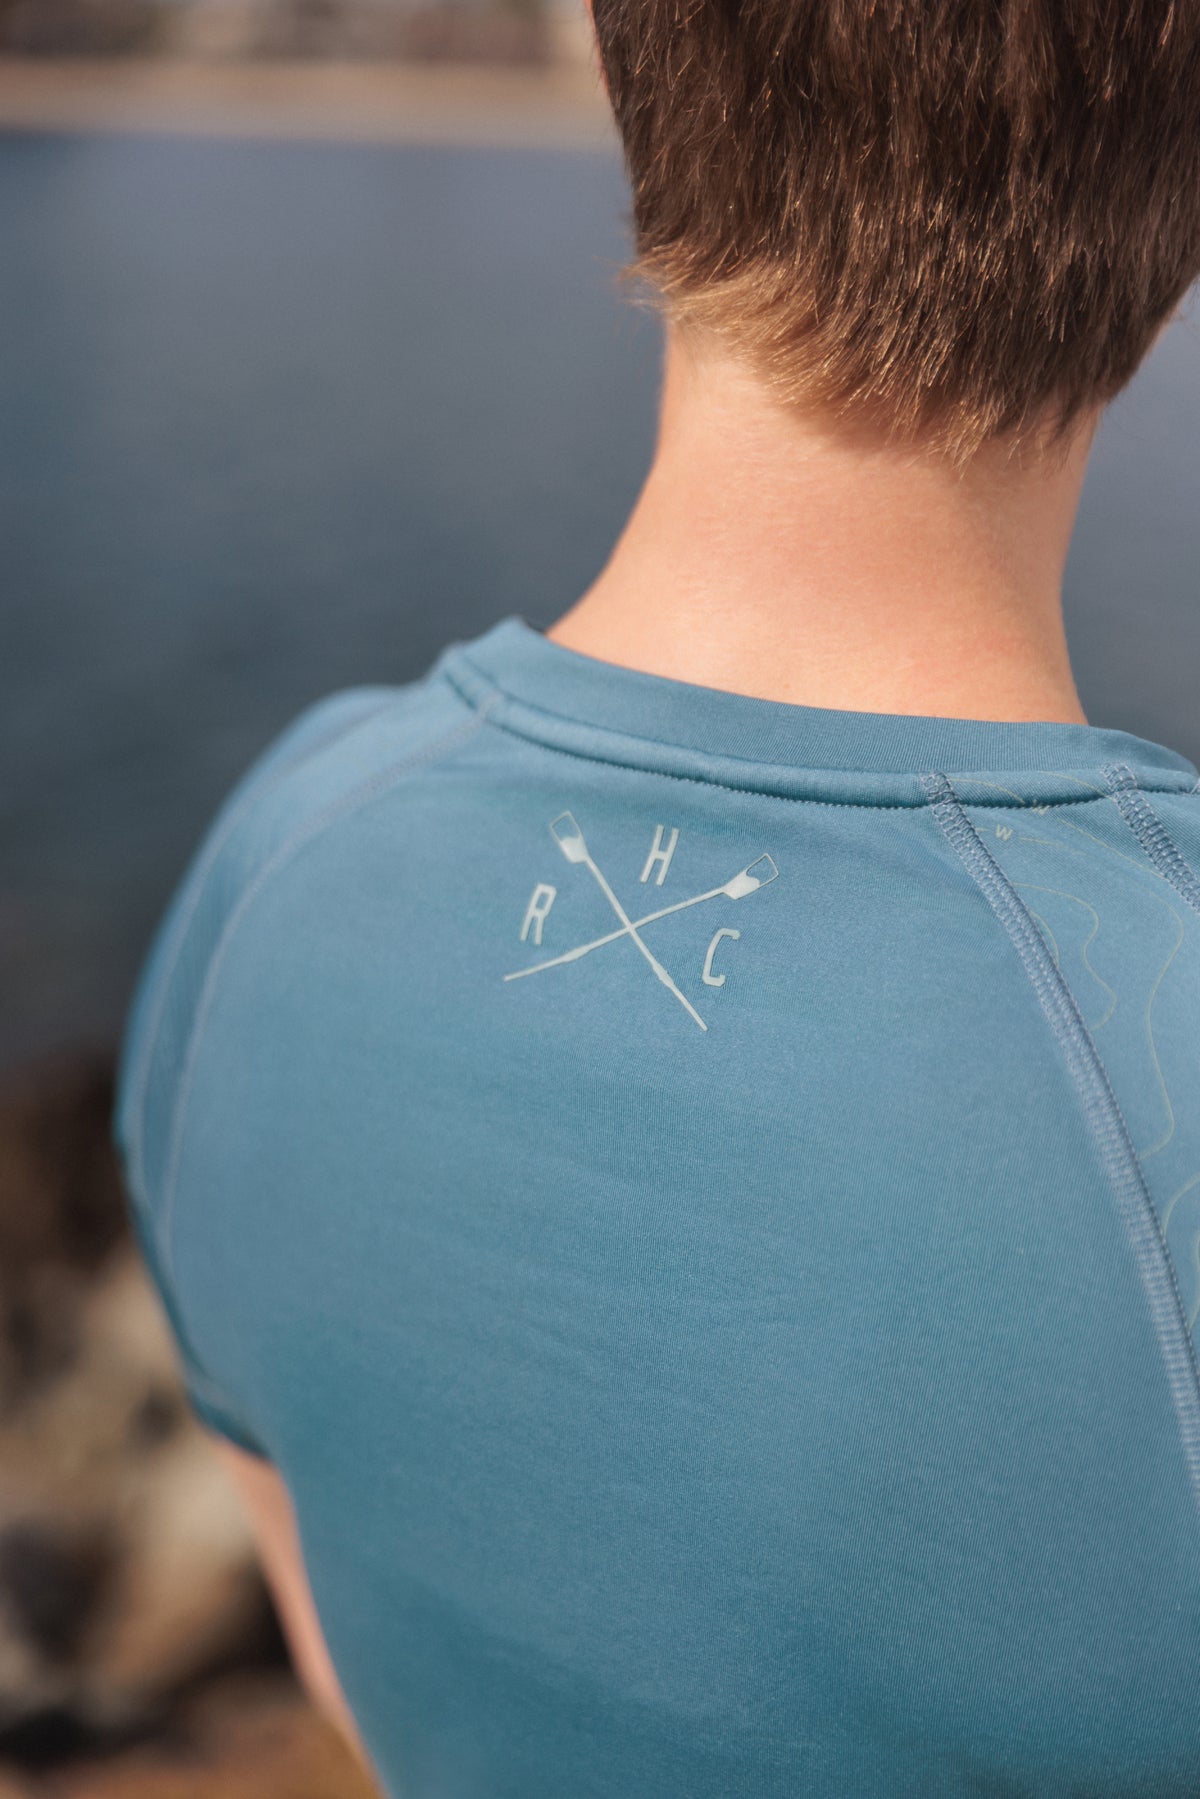 mositure wicking compression tee in gray with hrc crossed oar logo on back between shoulders